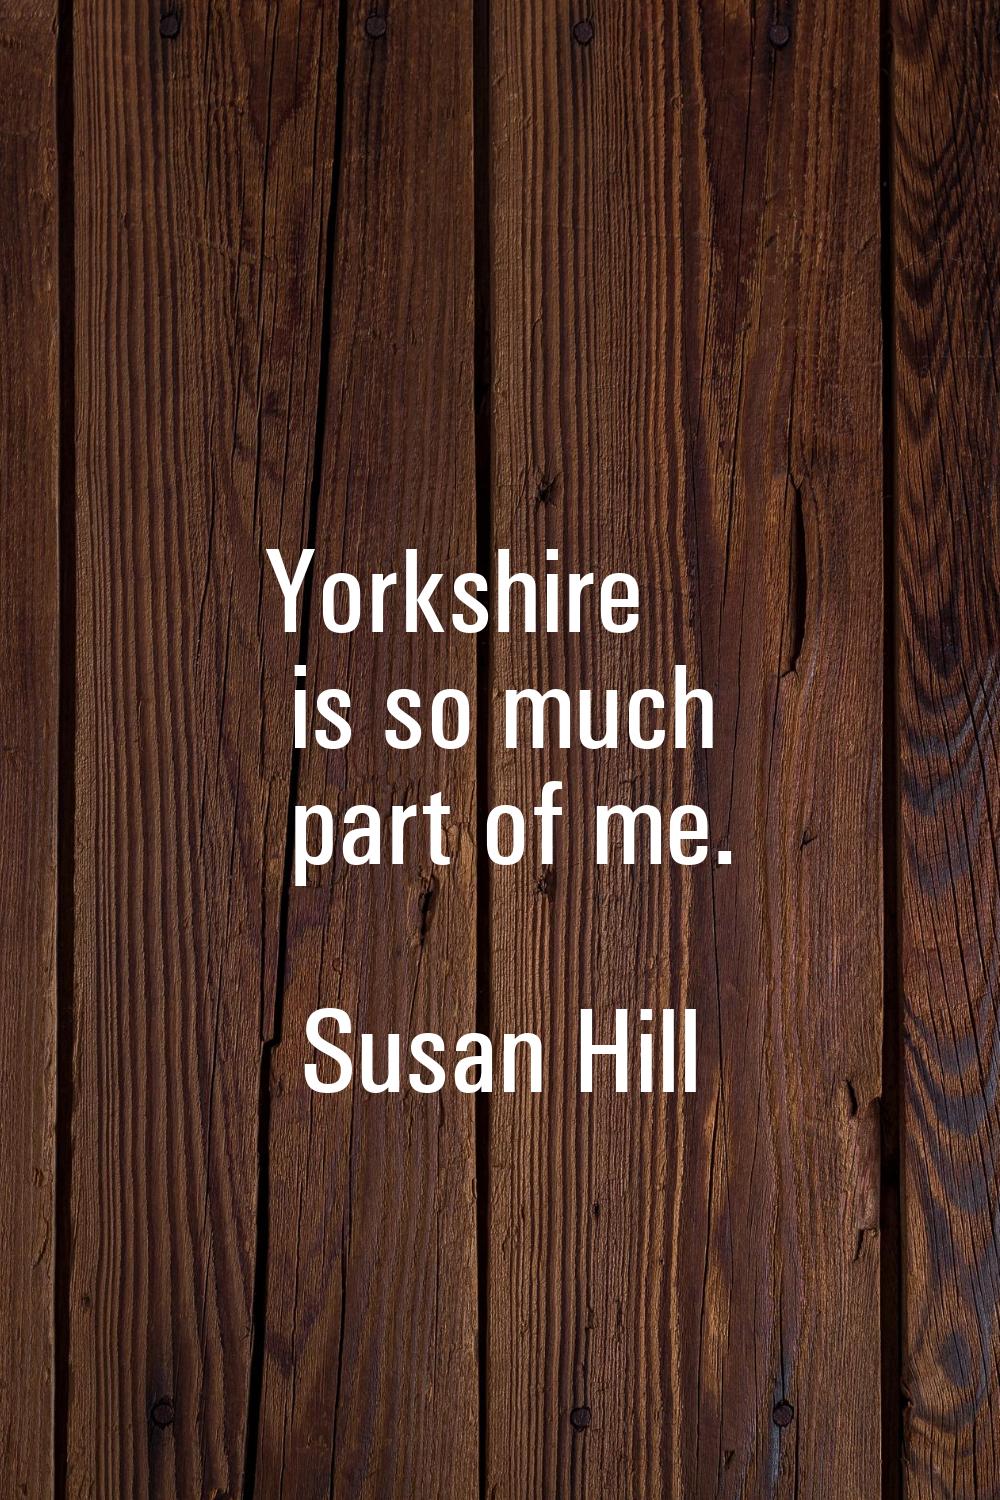 Yorkshire is so much part of me.